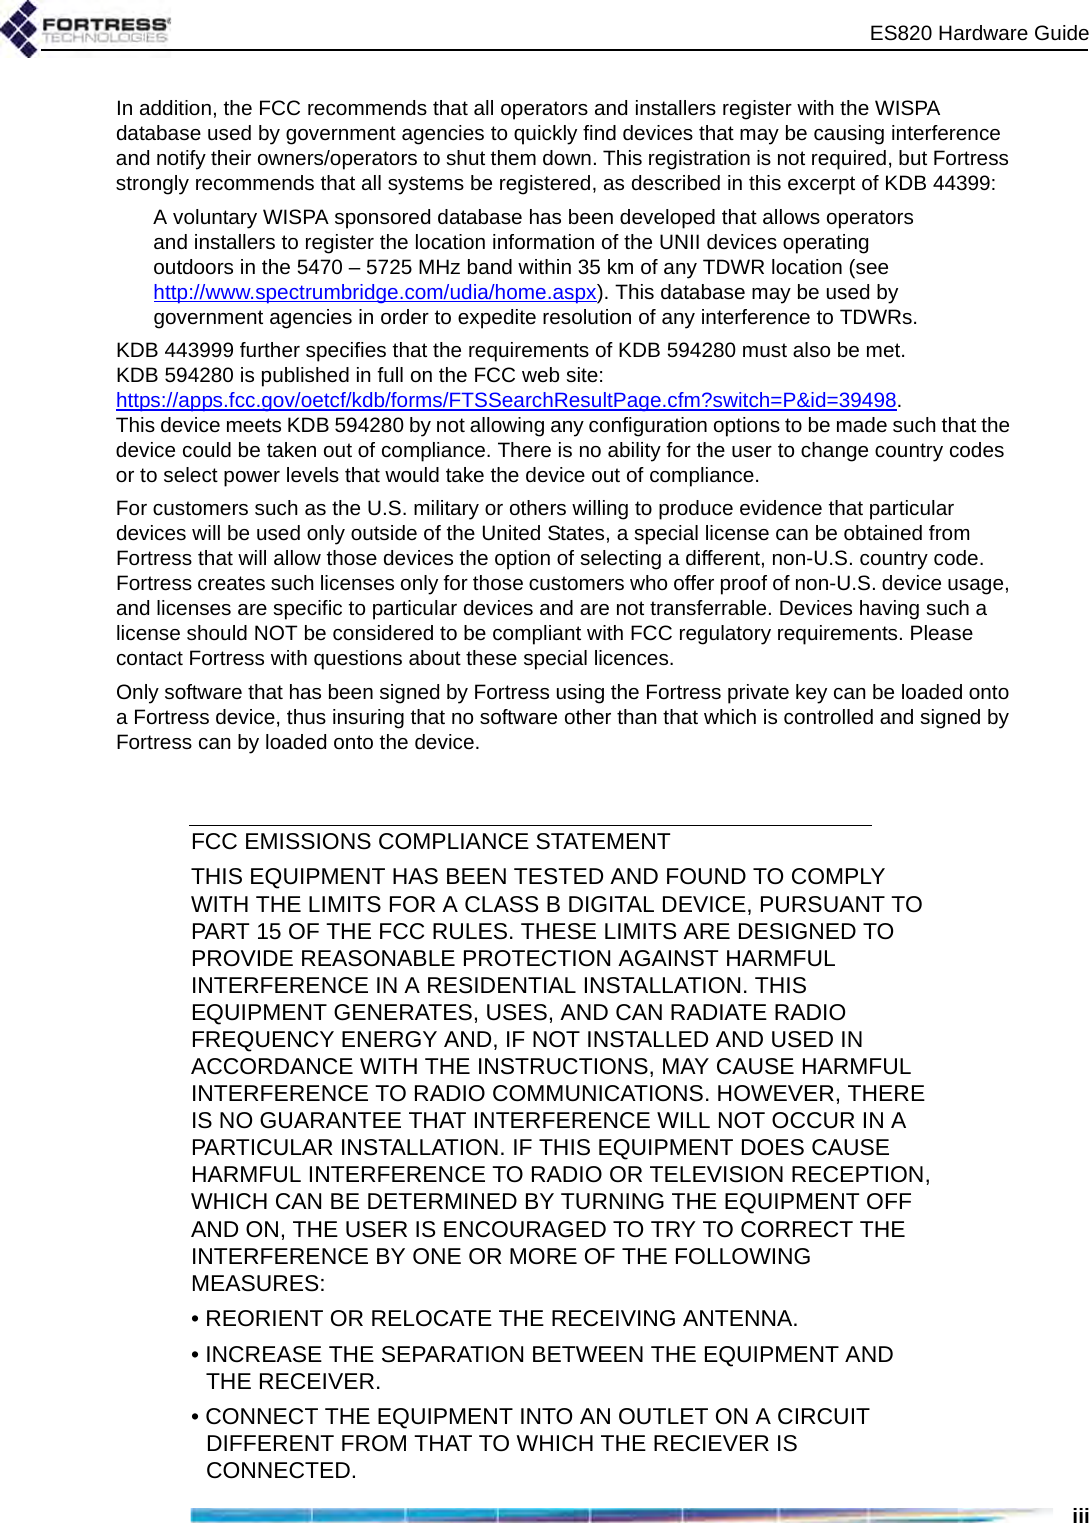 ES820 Hardware GuideiiiIn addition, the FCC recommends that all operators and installers register with the WISPA database used by government agencies to quickly find devices that may be causing interference and notify their owners/operators to shut them down. This registration is not required, but Fortress strongly recommends that all systems be registered, as described in this excerpt of KDB 44399:A voluntary WISPA sponsored database has been developed that allows operators and installers to register the location information of the UNII devices operating outdoors in the 5470 – 5725 MHz band within 35 km of any TDWR location (see http://www.spectrumbridge.com/udia/home.aspx). This database may be used by government agencies in order to expedite resolution of any interference to TDWRs. KDB 443999 further specifies that the requirements of KDB 594280 must also be met. KDB 594280 is published in full on the FCC web site: https://apps.fcc.gov/oetcf/kdb/forms/FTSSearchResultPage.cfm?switch=P&amp;id=39498. This device meets KDB 594280 by not allowing any configuration options to be made such that the device could be taken out of compliance. There is no ability for the user to change country codes or to select power levels that would take the device out of compliance.For customers such as the U.S. military or others willing to produce evidence that particular devices will be used only outside of the United States, a special license can be obtained from Fortress that will allow those devices the option of selecting a different, non-U.S. country code. Fortress creates such licenses only for those customers who offer proof of non-U.S. device usage, and licenses are specific to particular devices and are not transferrable. Devices having such a license should NOT be considered to be compliant with FCC regulatory requirements. Please contact Fortress with questions about these special licences.Only software that has been signed by Fortress using the Fortress private key can be loaded onto a Fortress device, thus insuring that no software other than that which is controlled and signed by Fortress can by loaded onto the device.FCC EMISSIONS COMPLIANCE STATEMENT   THIS EQUIPMENT HAS BEEN TESTED AND FOUND TO COMPLY WITH THE LIMITS FOR A CLASS B DIGITAL DEVICE, PURSUANT TO PART 15 OF THE FCC RULES. THESE LIMITS ARE DESIGNED TO PROVIDE REASONABLE PROTECTION AGAINST HARMFUL INTERFERENCE IN A RESIDENTIAL INSTALLATION. THIS EQUIPMENT GENERATES, USES, AND CAN RADIATE RADIO FREQUENCY ENERGY AND, IF NOT INSTALLED AND USED IN ACCORDANCE WITH THE INSTRUCTIONS, MAY CAUSE HARMFUL INTERFERENCE TO RADIO COMMUNICATIONS. HOWEVER, THERE IS NO GUARANTEE THAT INTERFERENCE WILL NOT OCCUR IN A PARTICULAR INSTALLATION. IF THIS EQUIPMENT DOES CAUSE HARMFUL INTERFERENCE TO RADIO OR TELEVISION RECEPTION, WHICH CAN BE DETERMINED BY TURNING THE EQUIPMENT OFF AND ON, THE USER IS ENCOURAGED TO TRY TO CORRECT THE INTERFERENCE BY ONE OR MORE OF THE FOLLOWING MEASURES:• REORIENT OR RELOCATE THE RECEIVING ANTENNA.• INCREASE THE SEPARATION BETWEEN THE EQUIPMENT AND THE RECEIVER.• CONNECT THE EQUIPMENT INTO AN OUTLET ON A CIRCUIT DIFFERENT FROM THAT TO WHICH THE RECIEVER IS CONNECTED.